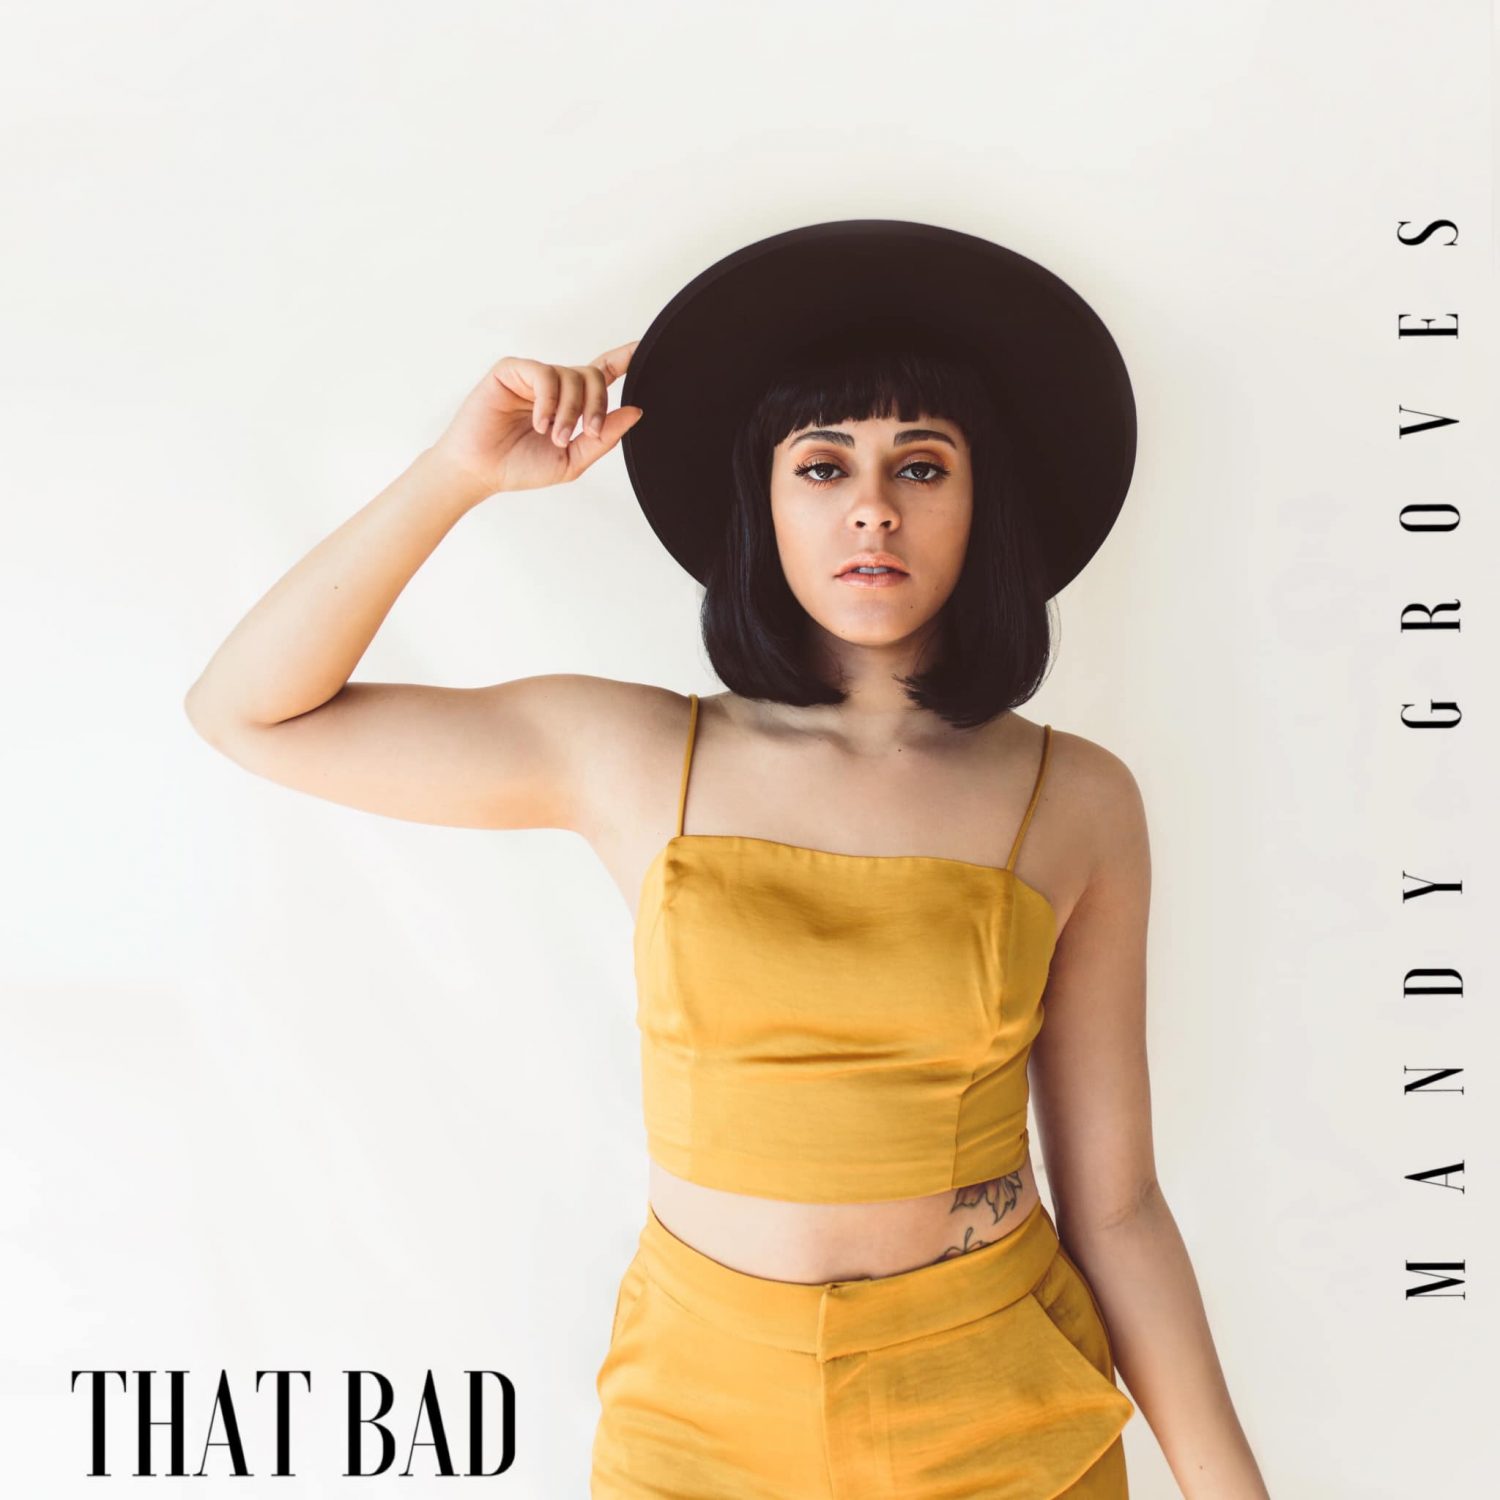 Mandy Groves Teases New EP With First Single, “That Bad”